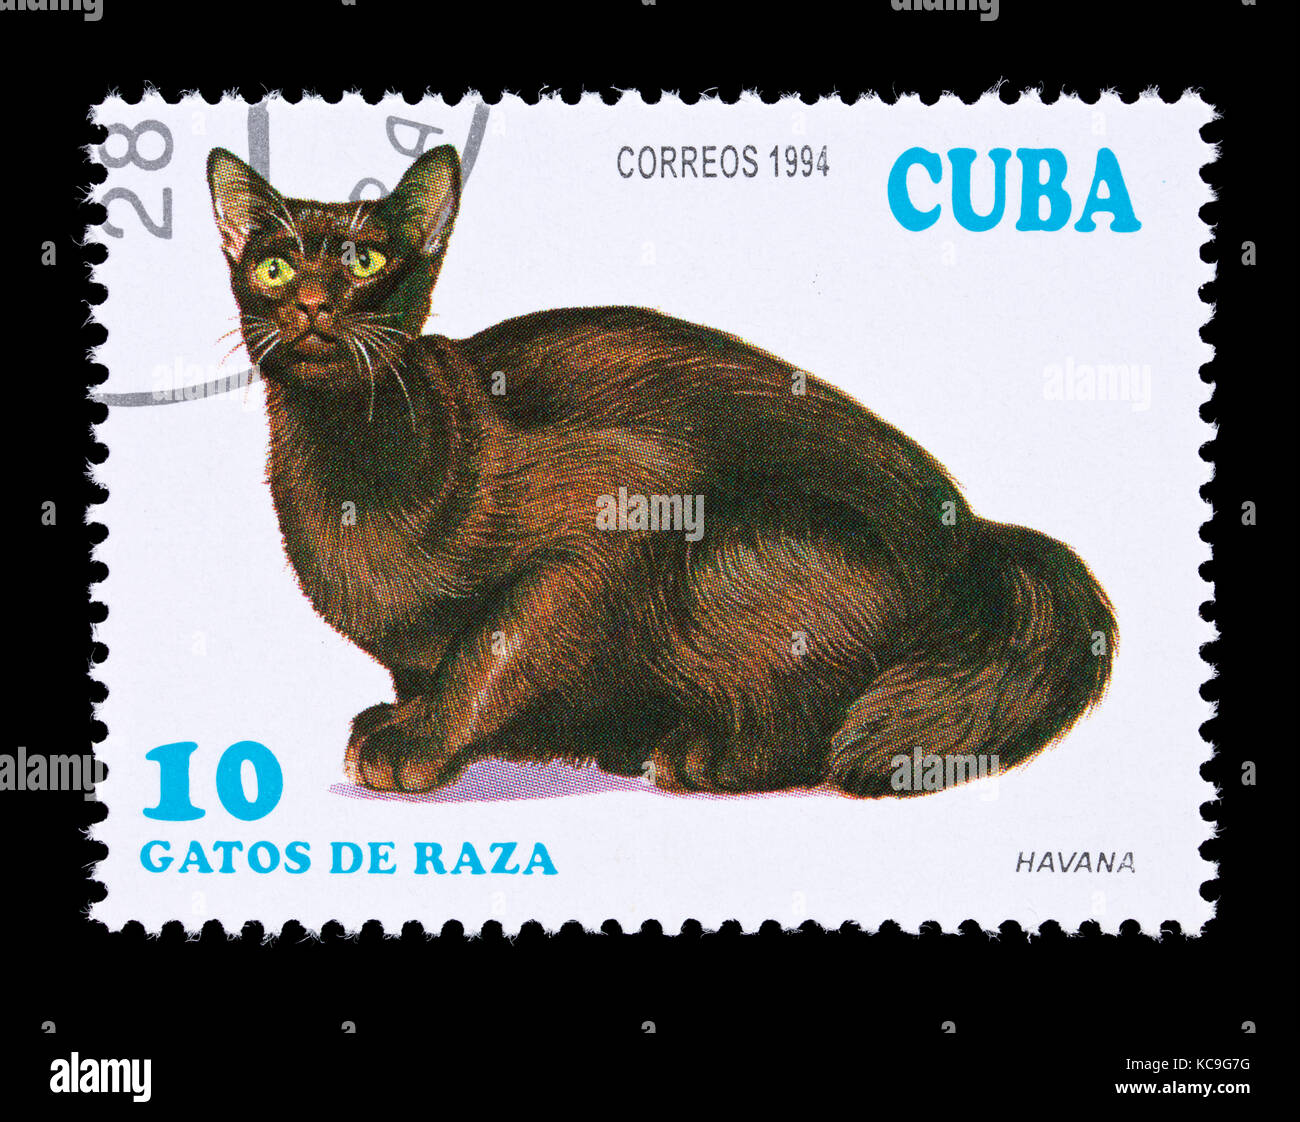 Postage stamp from Cuba depicting a Havana breed of domesticated cat. Stock Photo